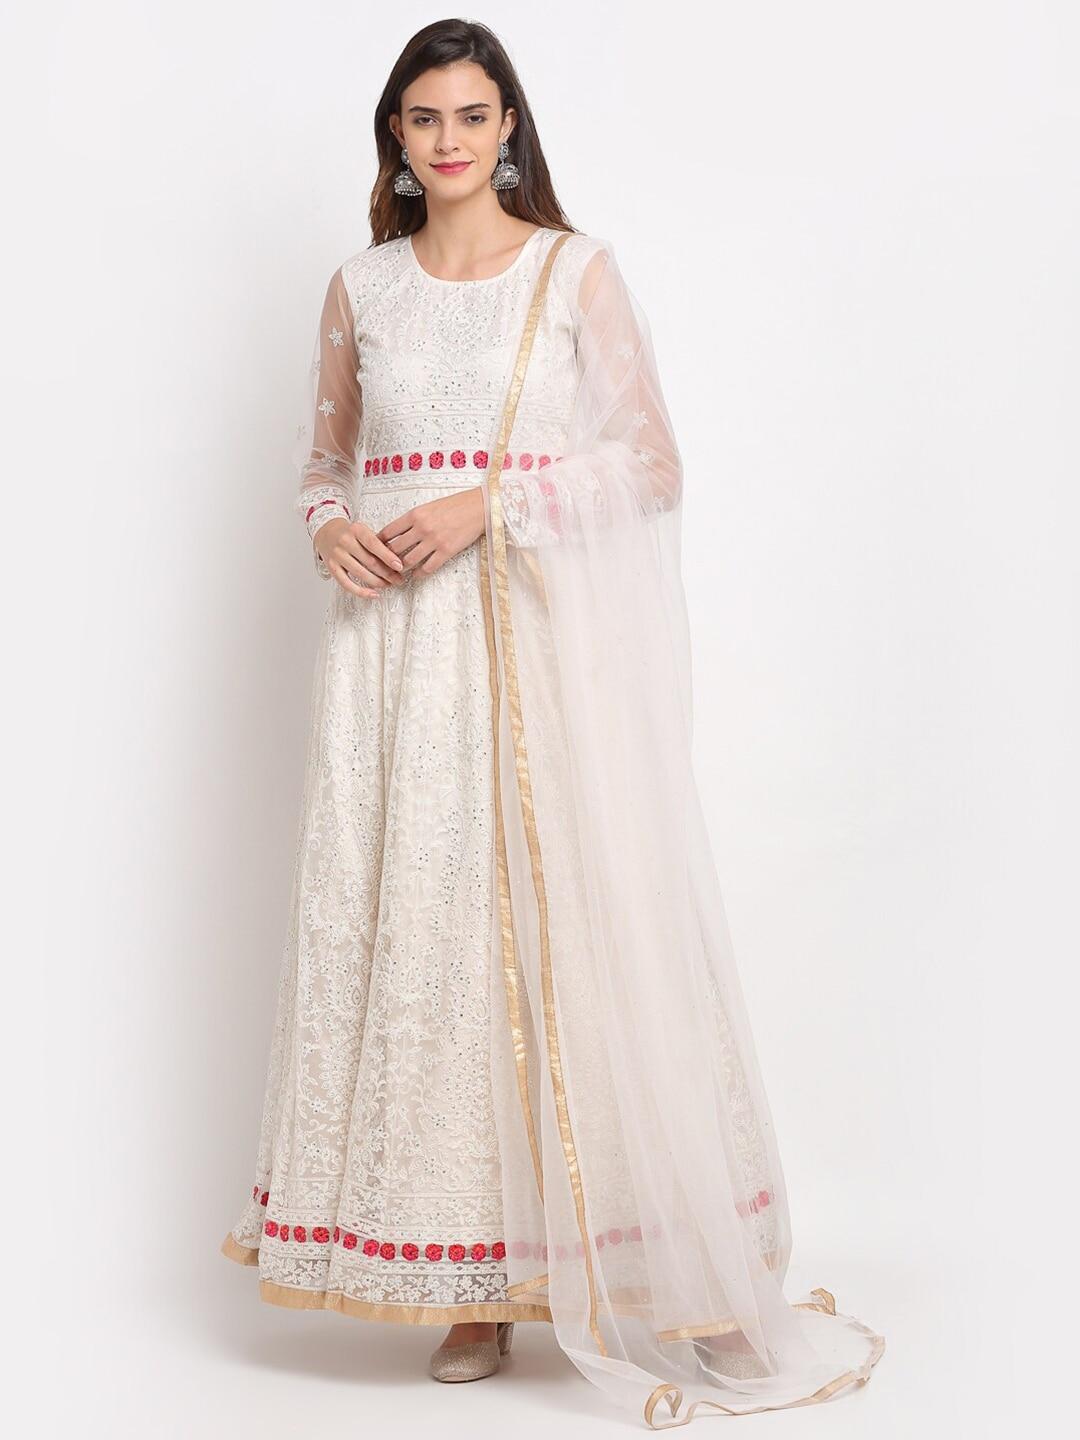 Stylee LIFESTYLE Cream-Coloured & Pink Embroidered Semi-Stitched Dress Material